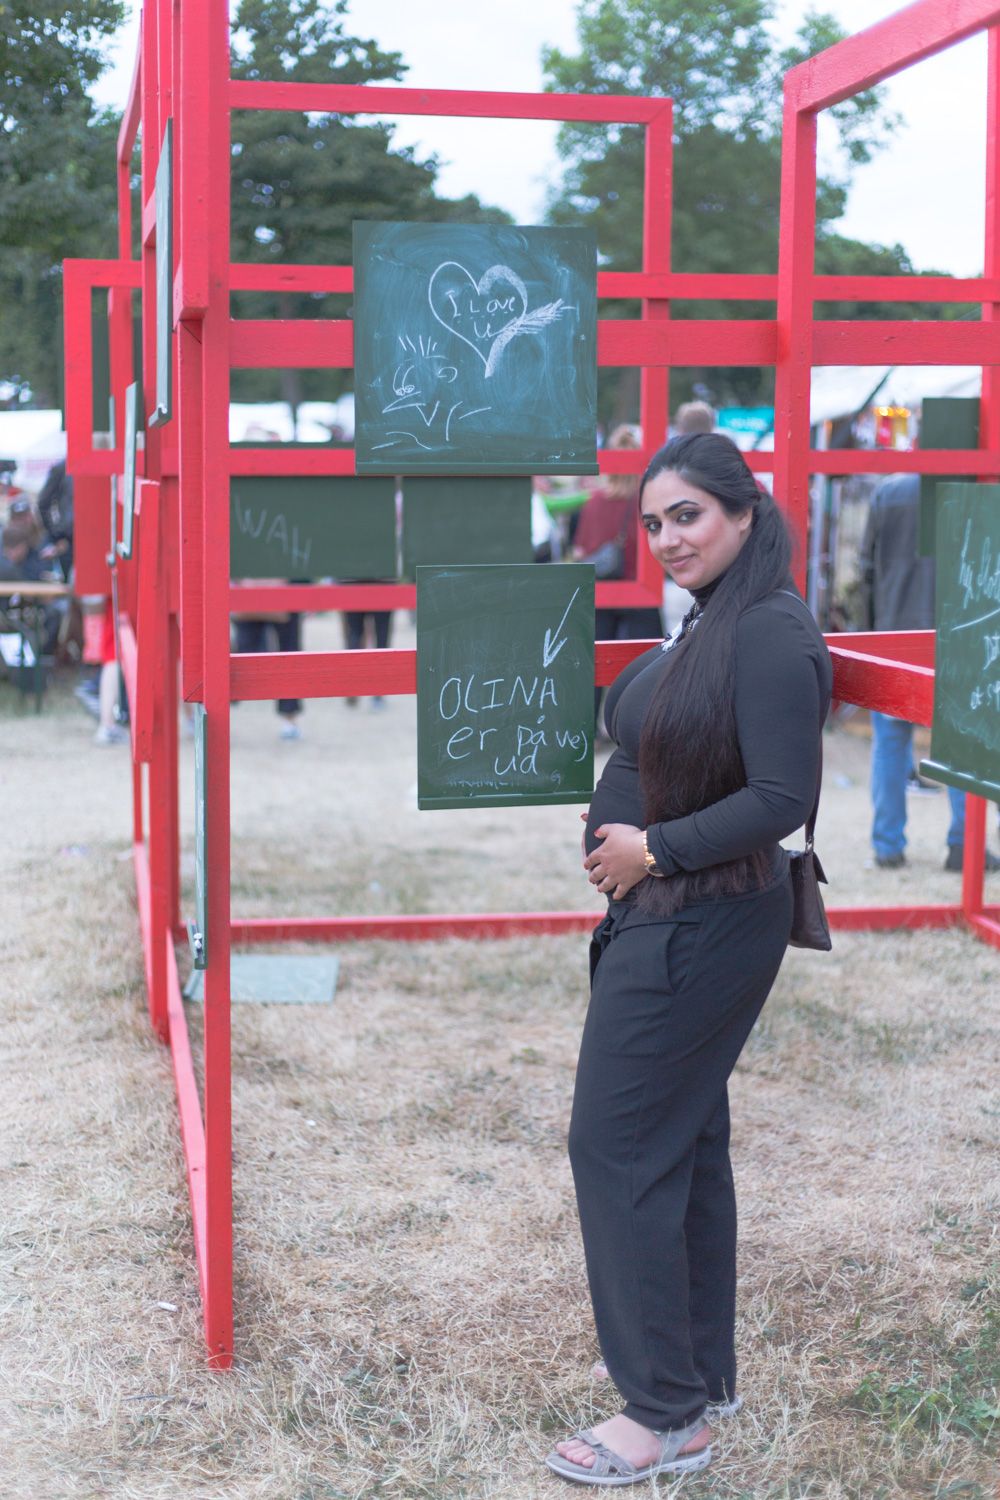 Hisham's wife standing with her hands on her pregnant belly in front of a sign saying "Olina is on her way out".